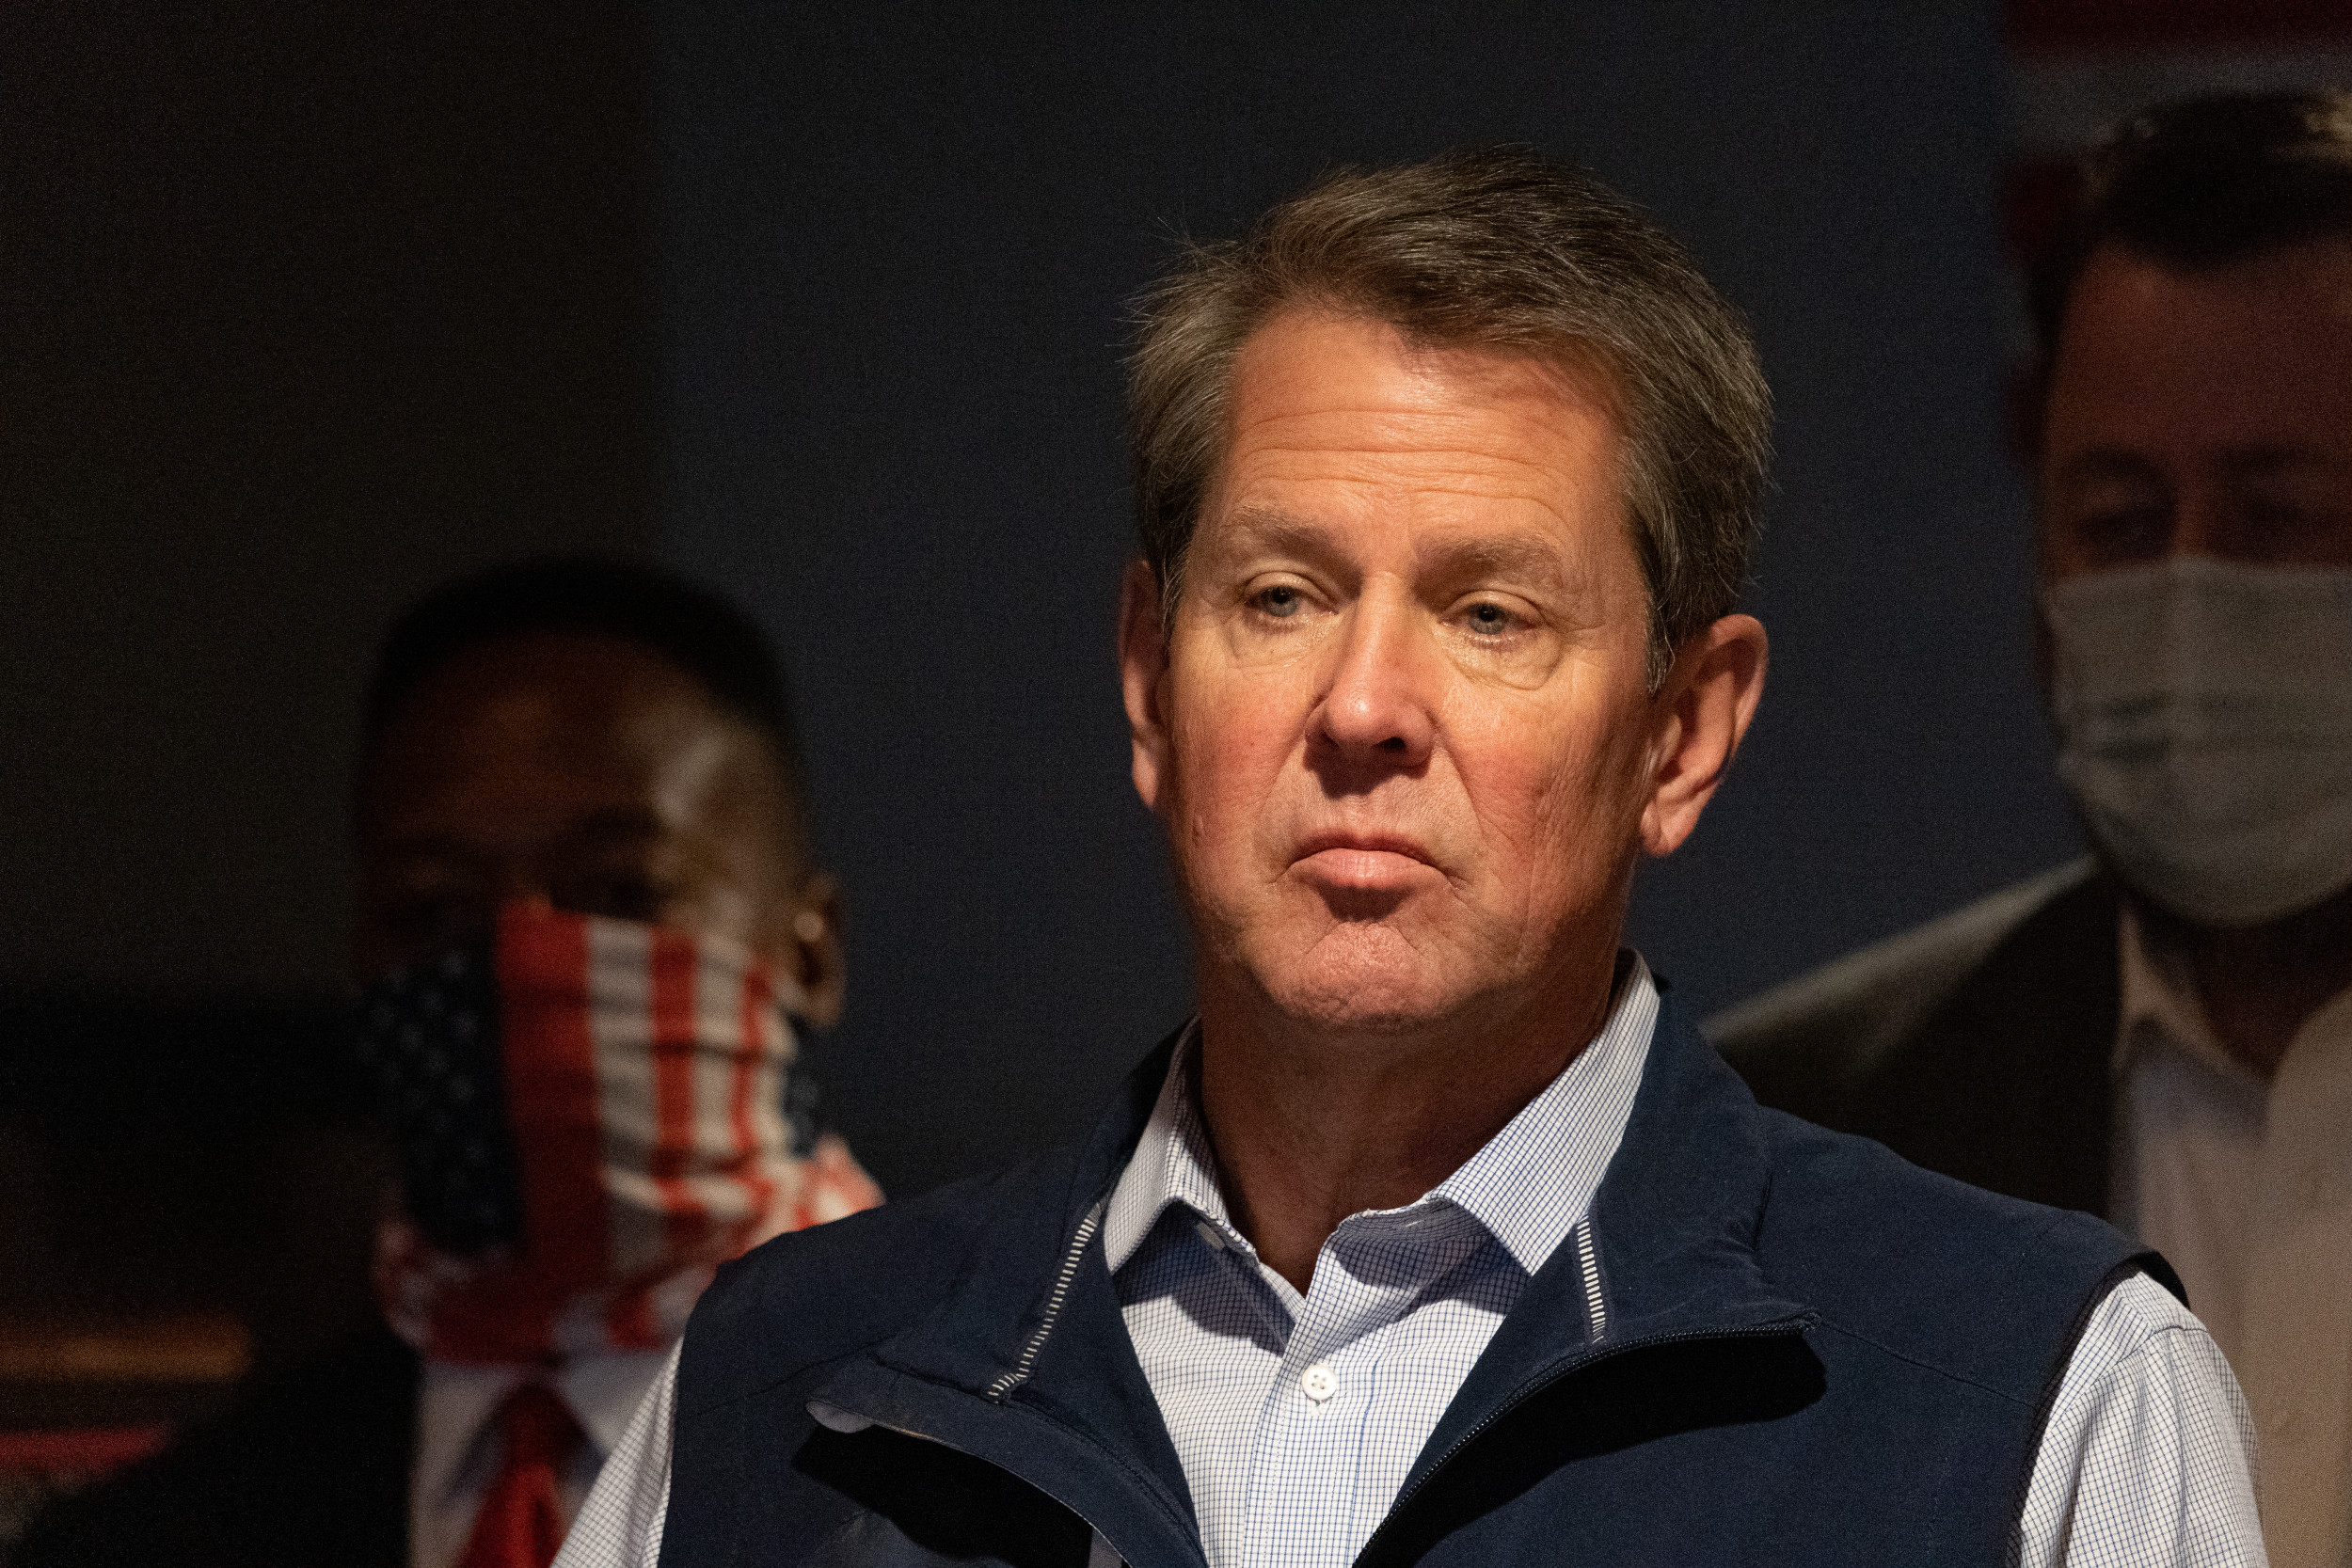 brian-kemp-wants-to-give-georgians-at-least-250-tax-rebate-with-state